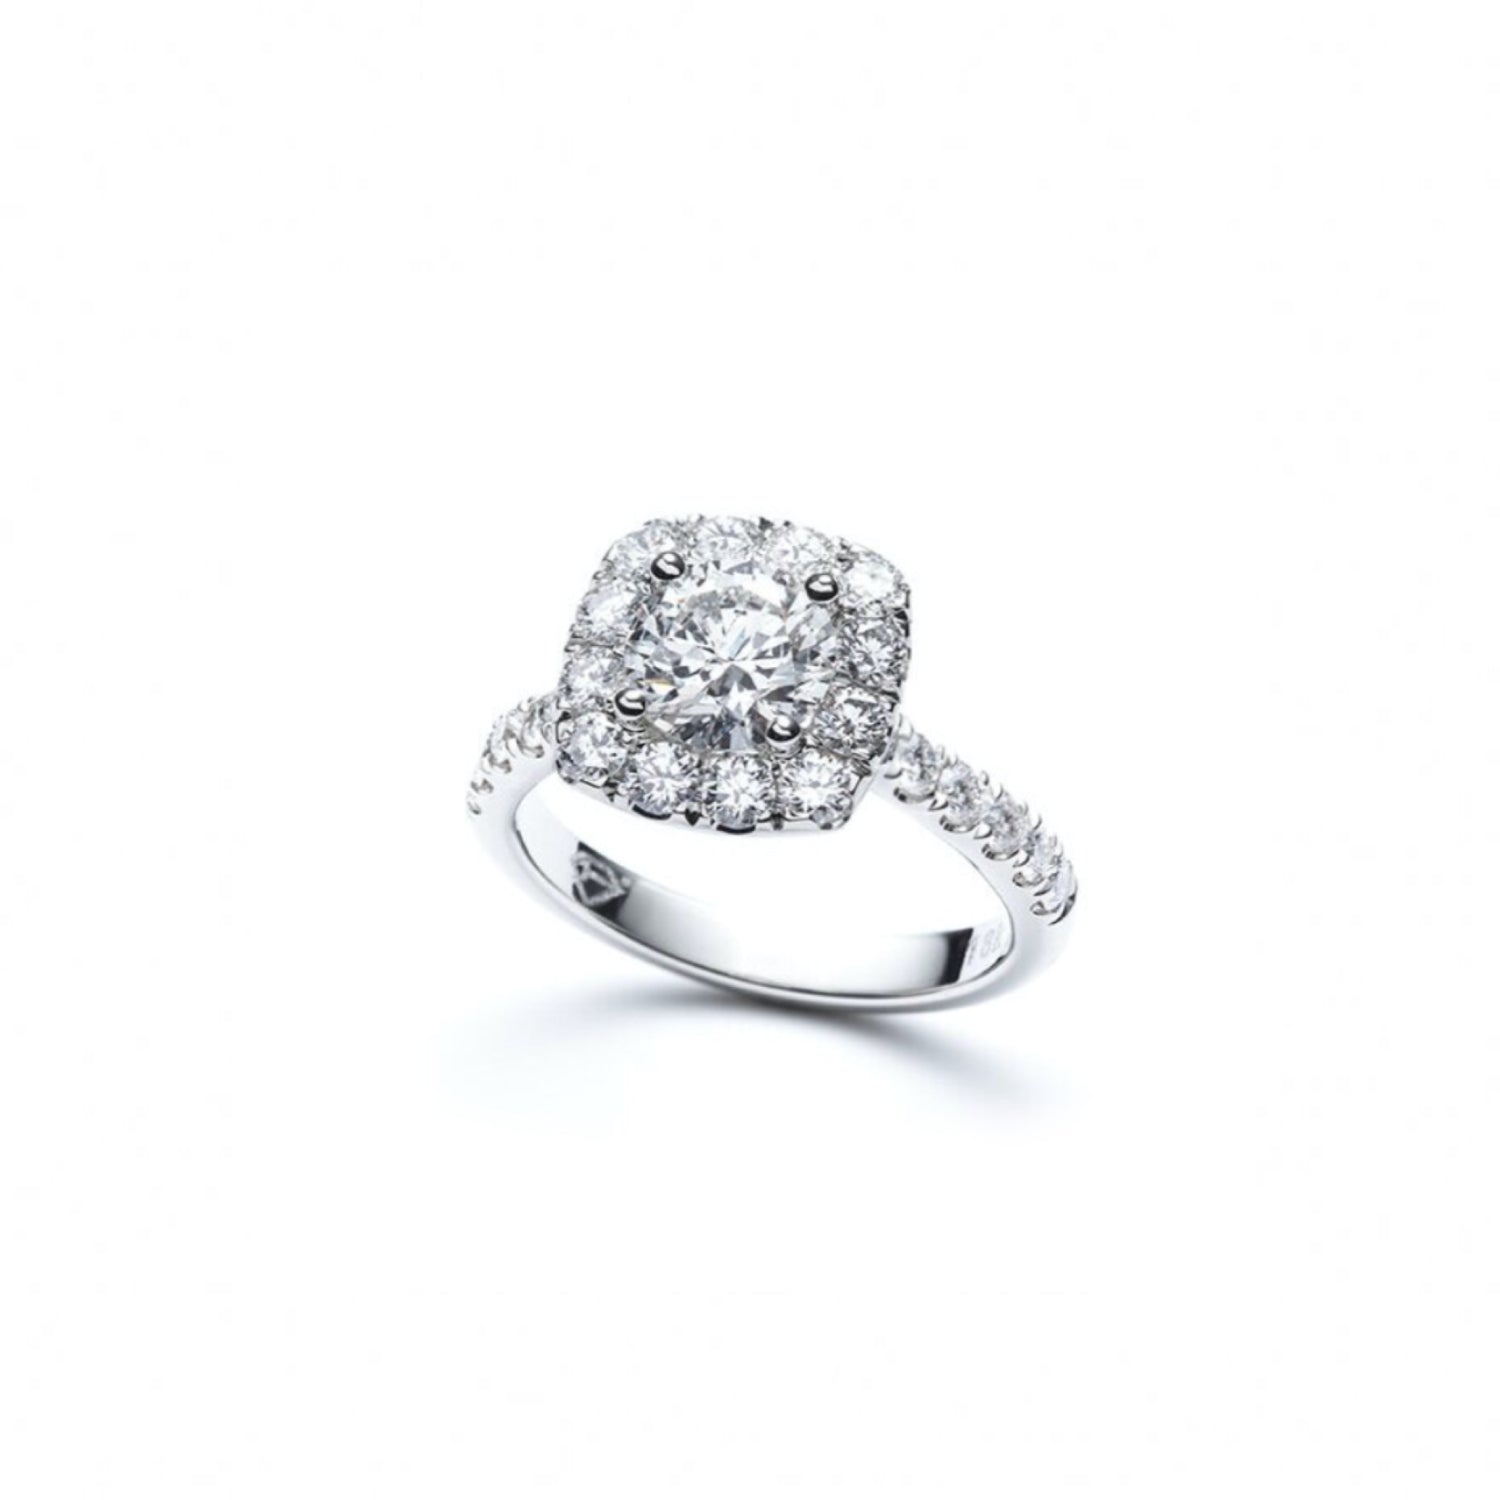 Round Brilliant Cut Diamond Square Halo Engagement Ring in White Gold